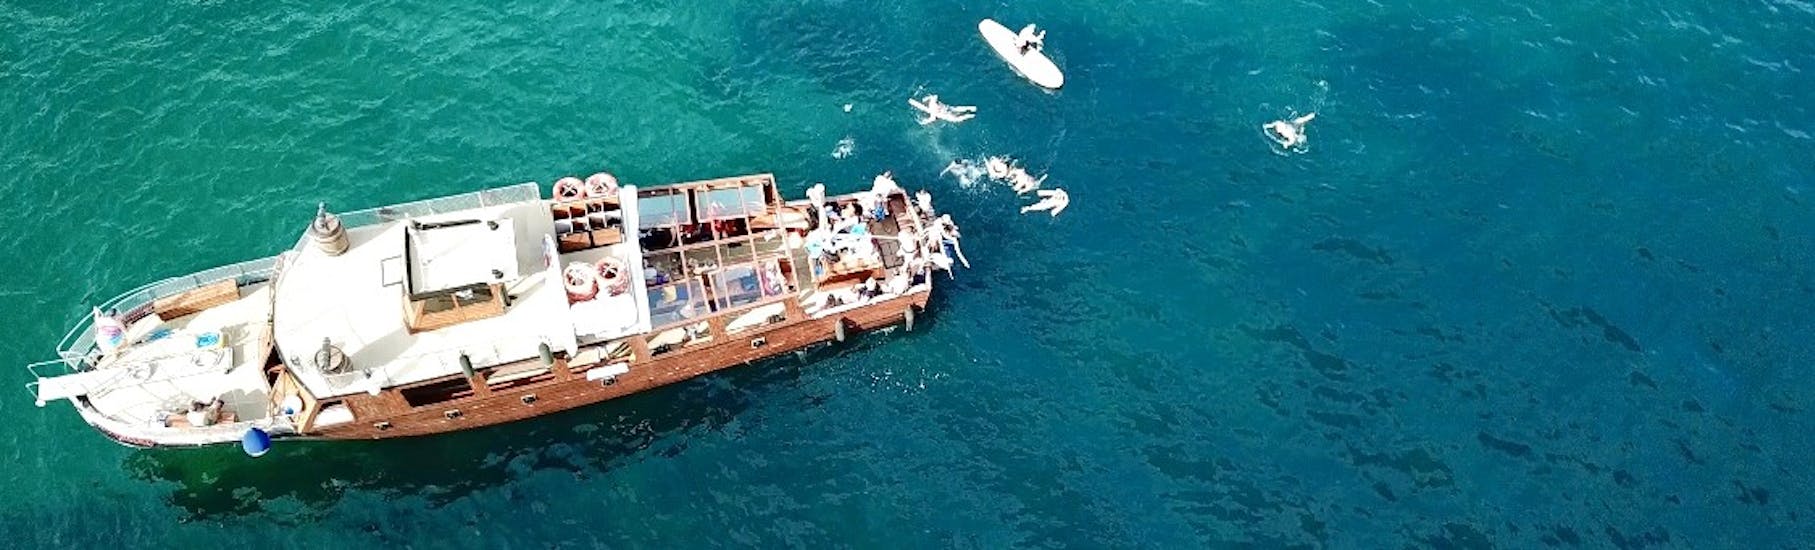 A view of our boat during a Pirate Boat Trip from Pollença with Snorkeling, SUP & Paella with Robinson Boat Trips.